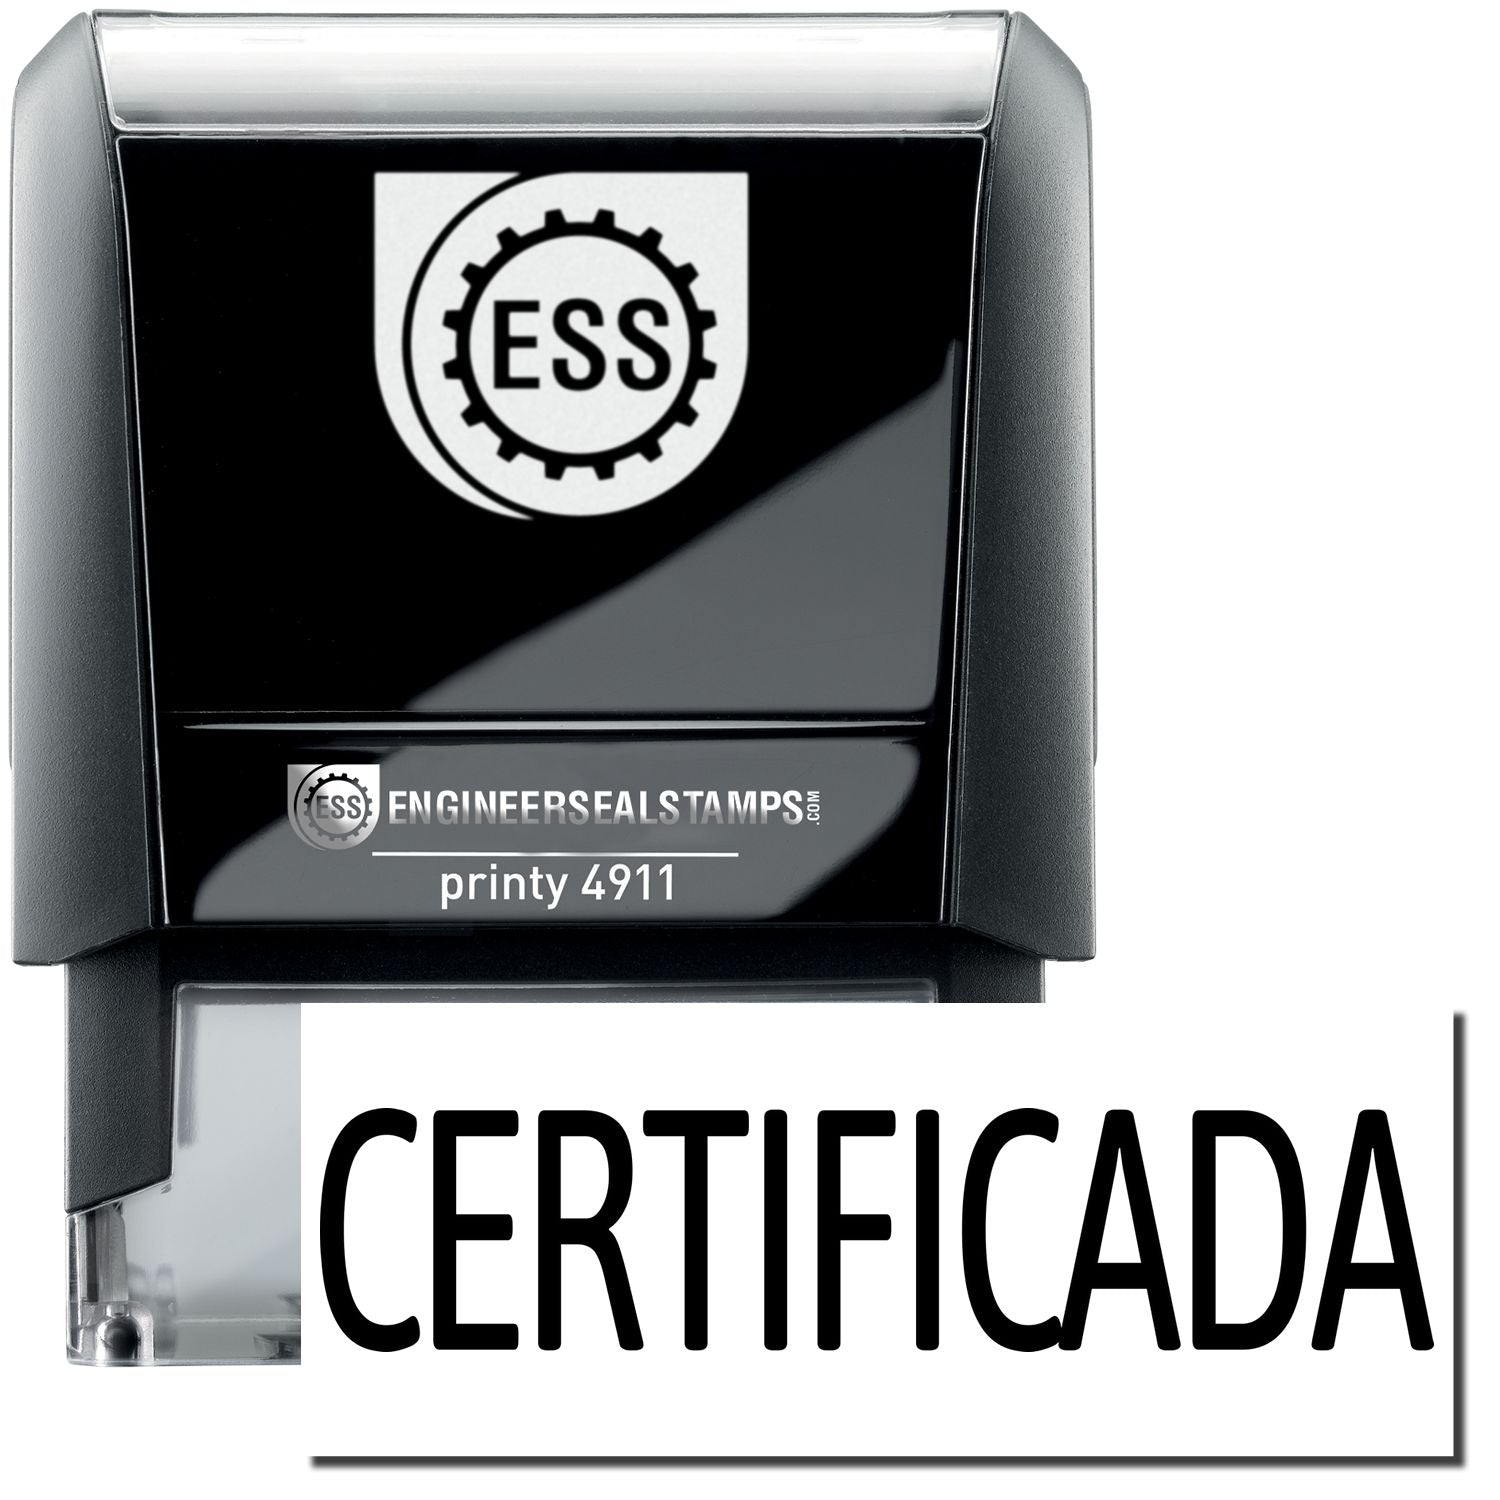 A self-inking stamp with a stamped image showing how the text "CERTIFICADA" is displayed after stamping.